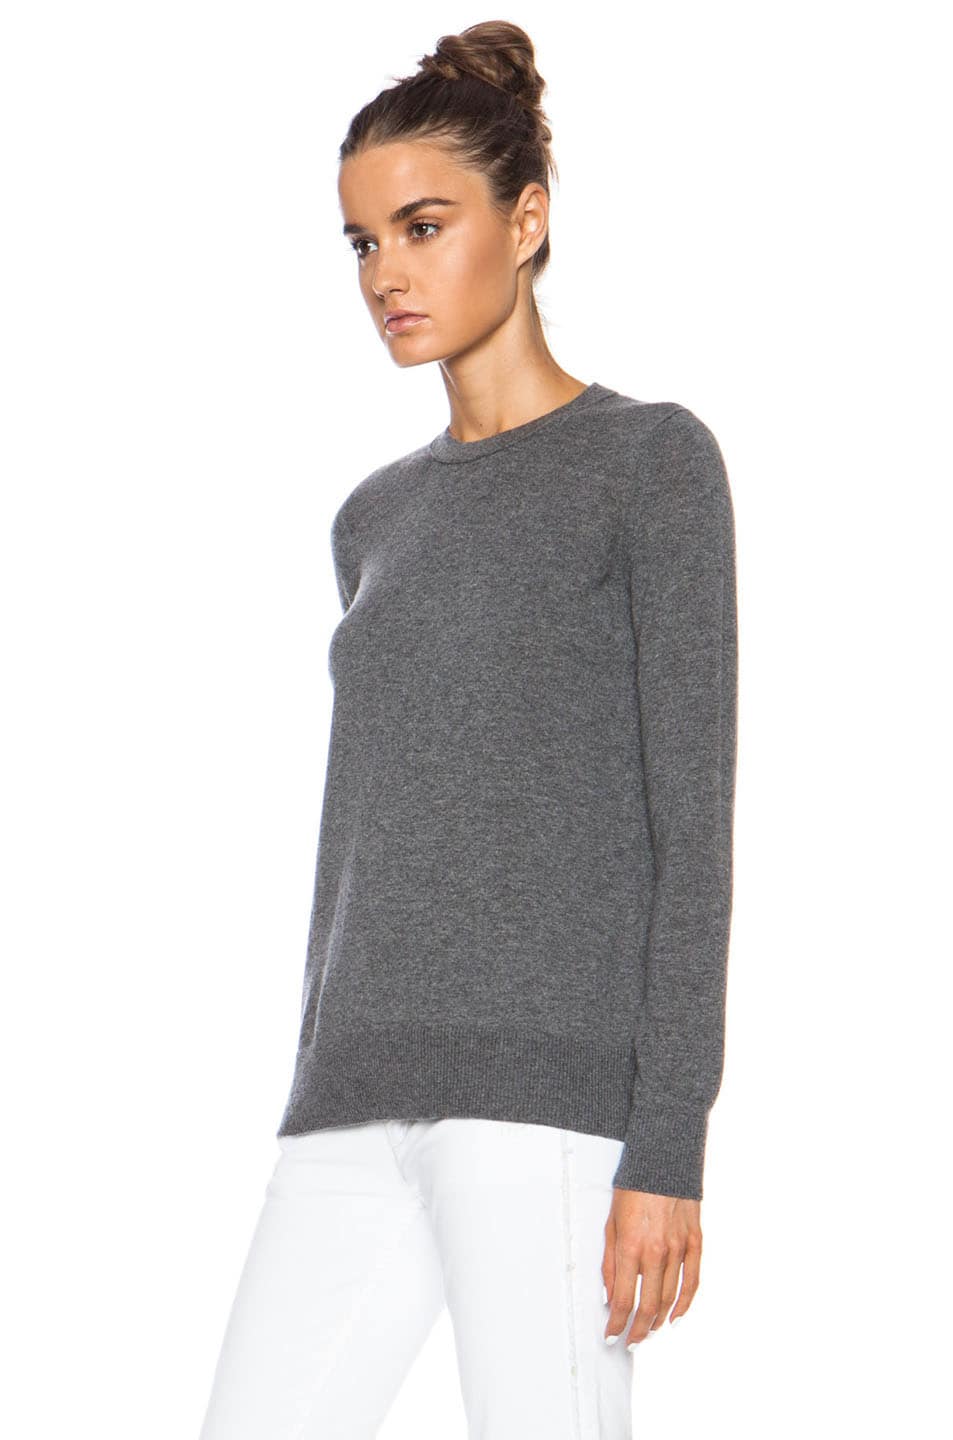 Vince Overlay Crewneck Cashmere Sweater in Heather Charcoal | FWRD